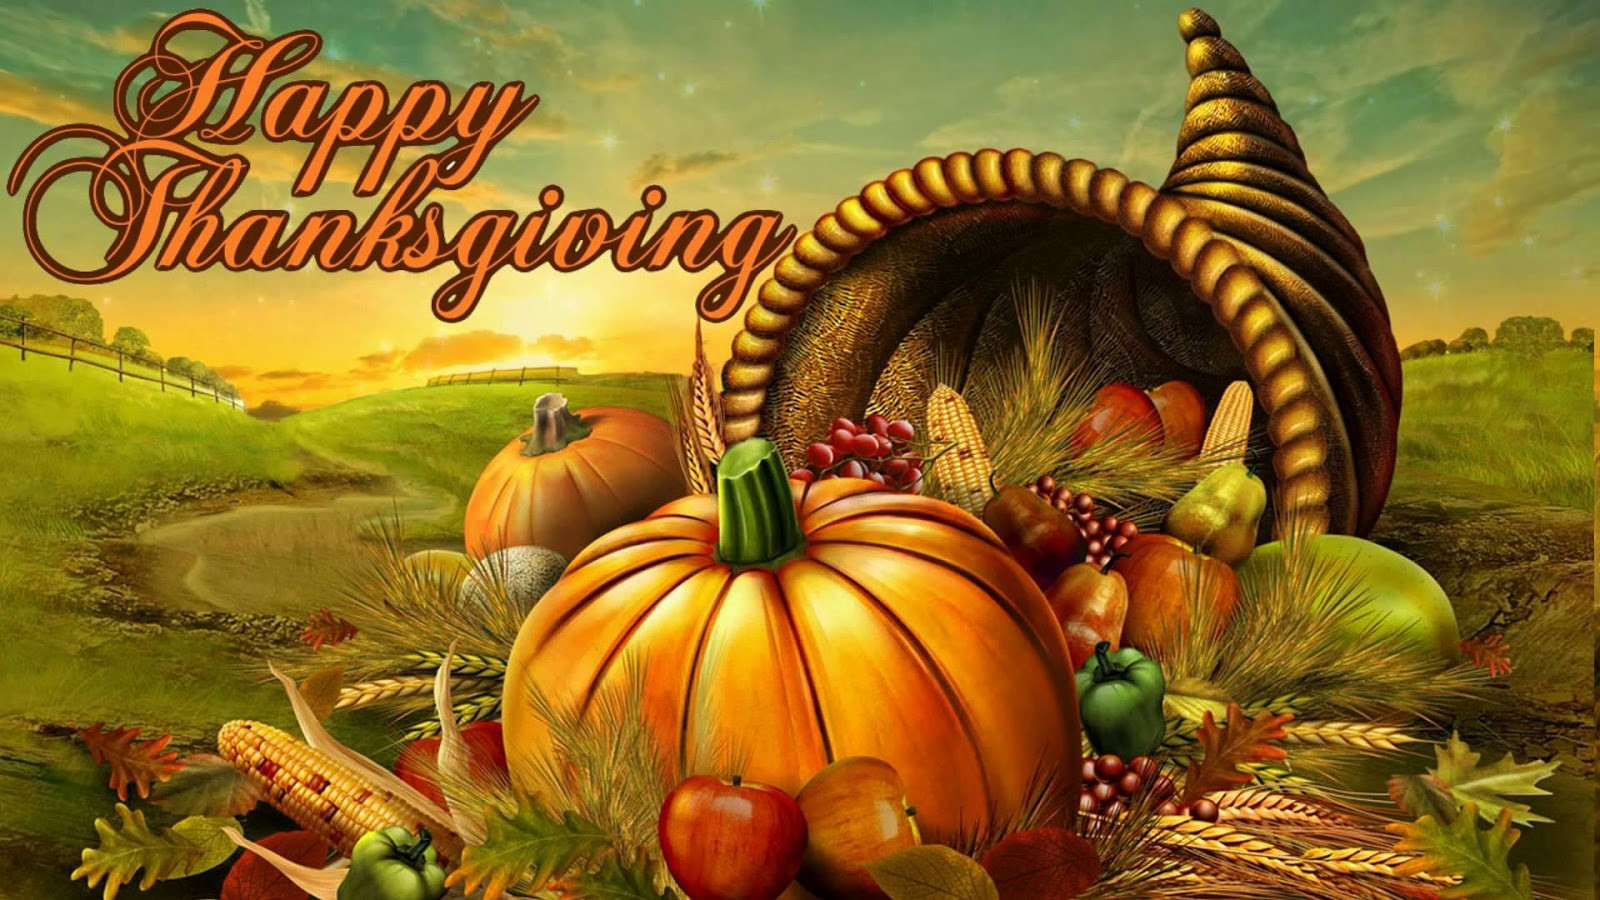 Thanksgiving 3D Wallpaper
 Buckaroo Leather Horse Tack Use Care and Maintenance